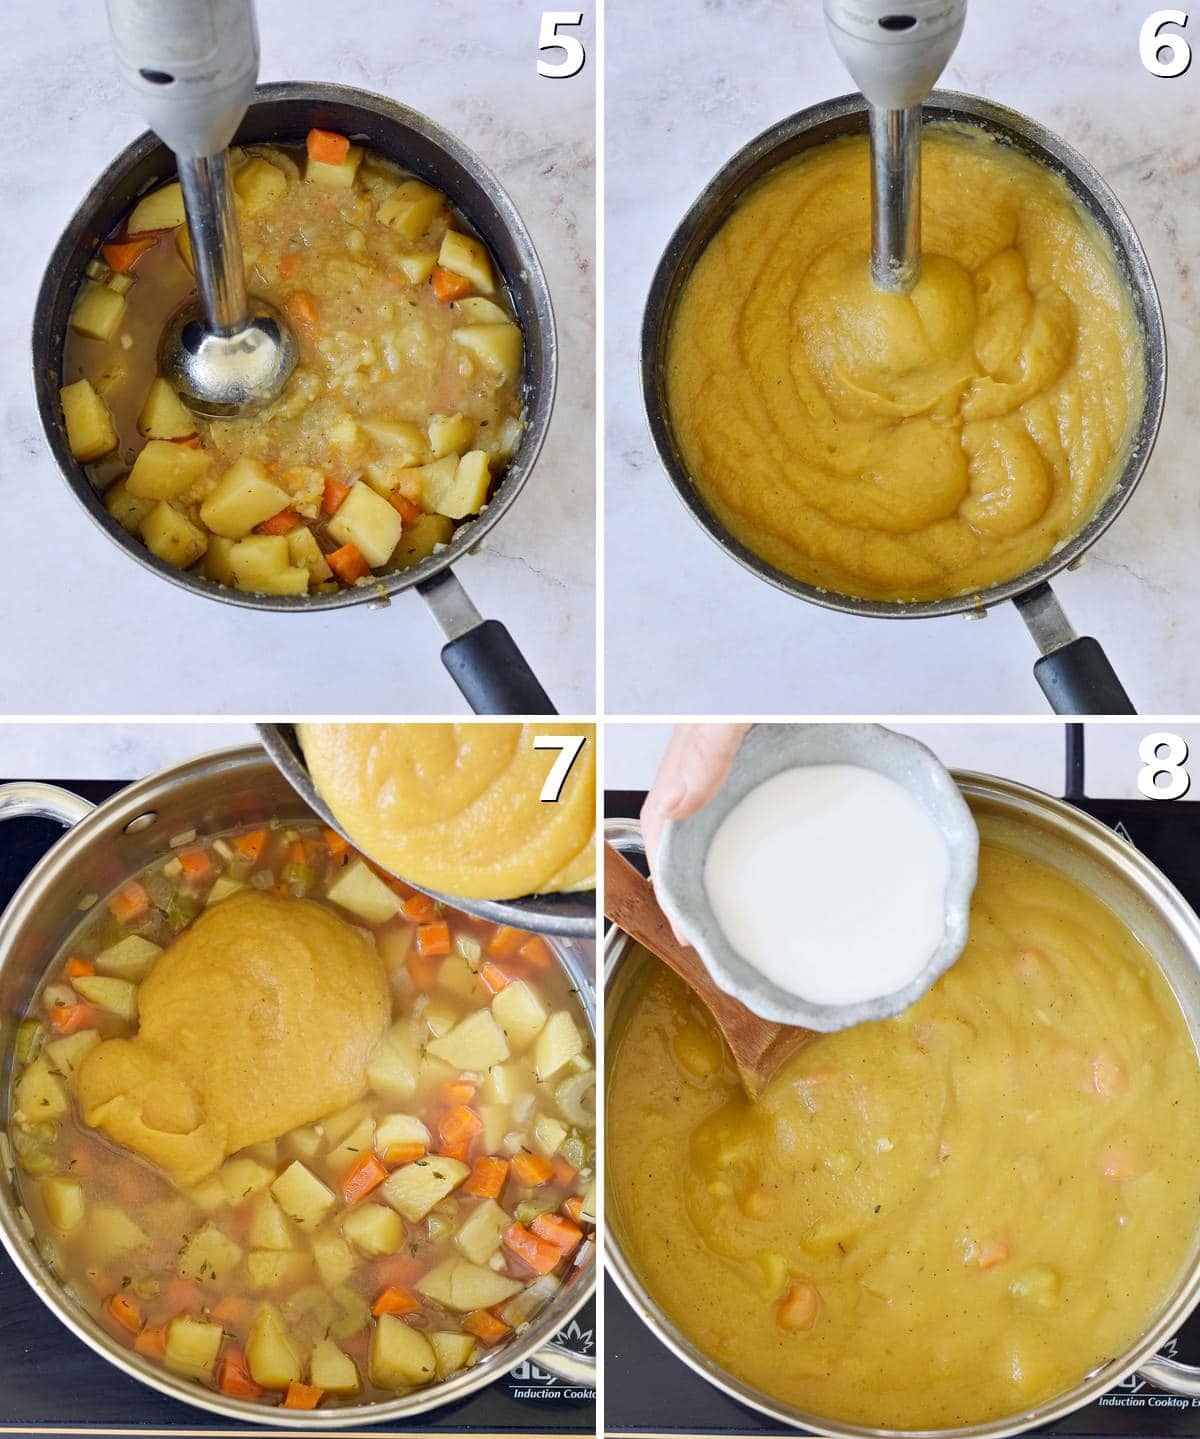 4 step-by-step photos of how to blend a stew with potatoes and veggies